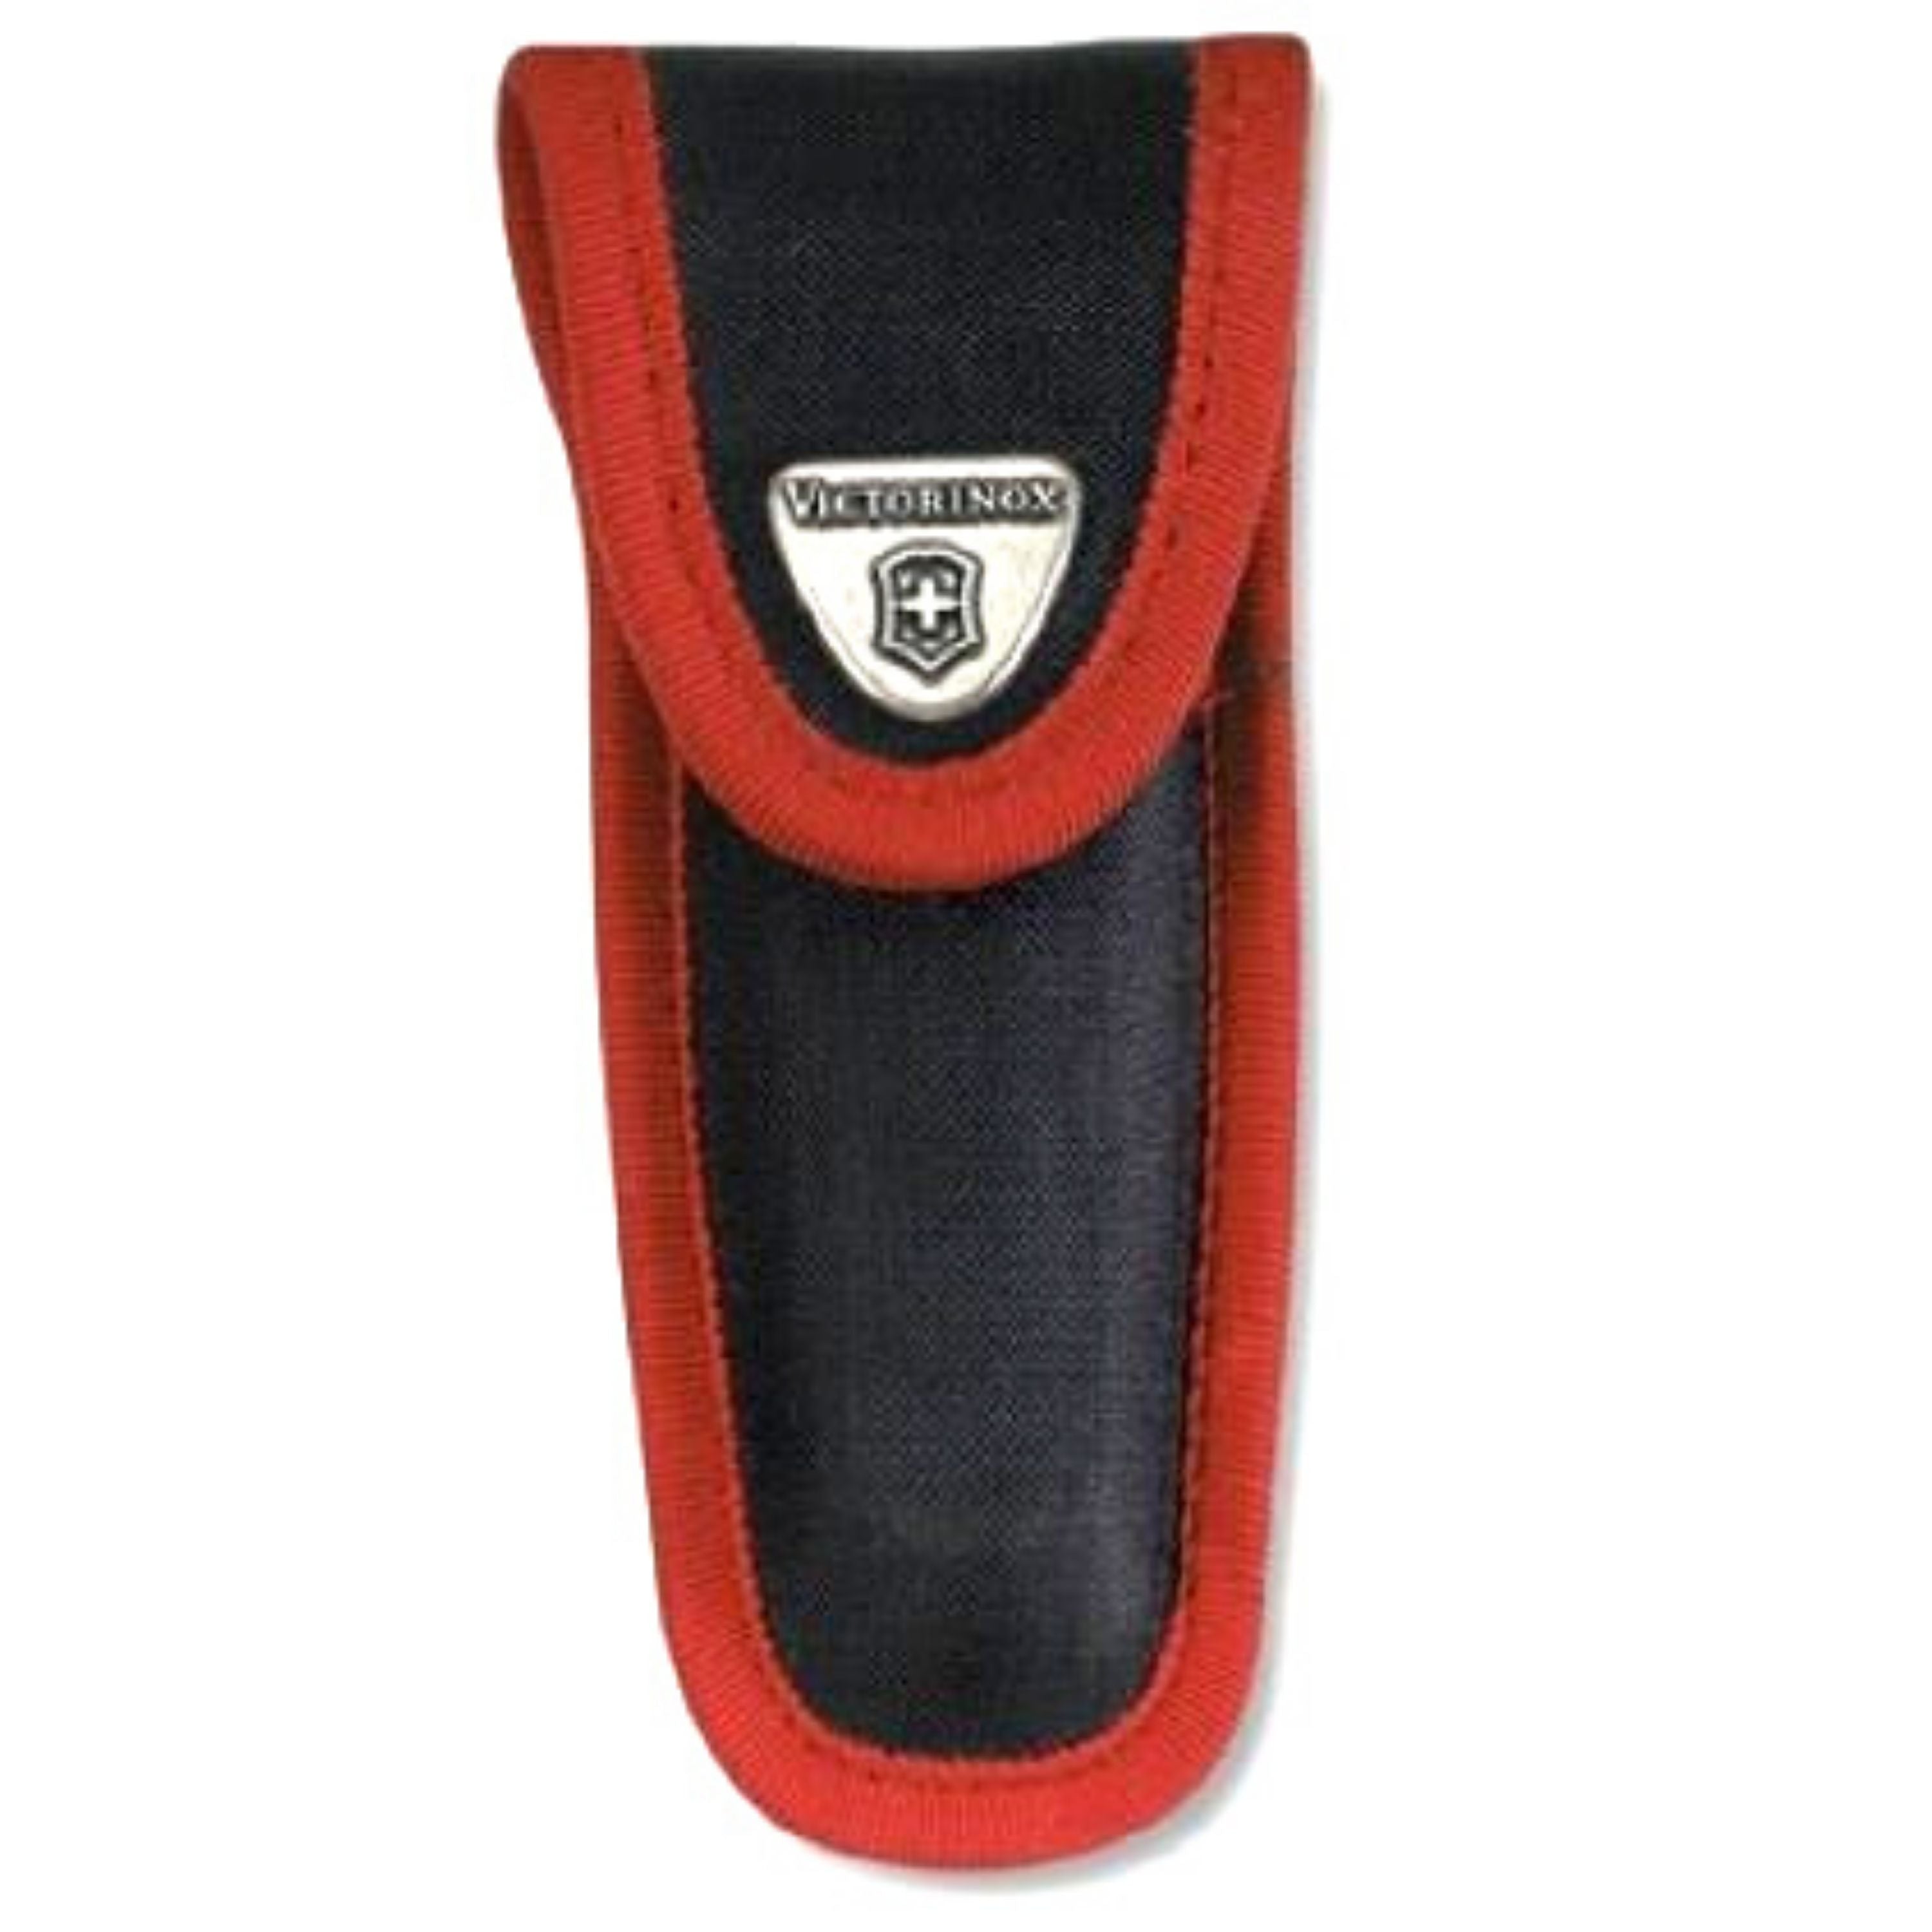 "Victorinox" knife pouch